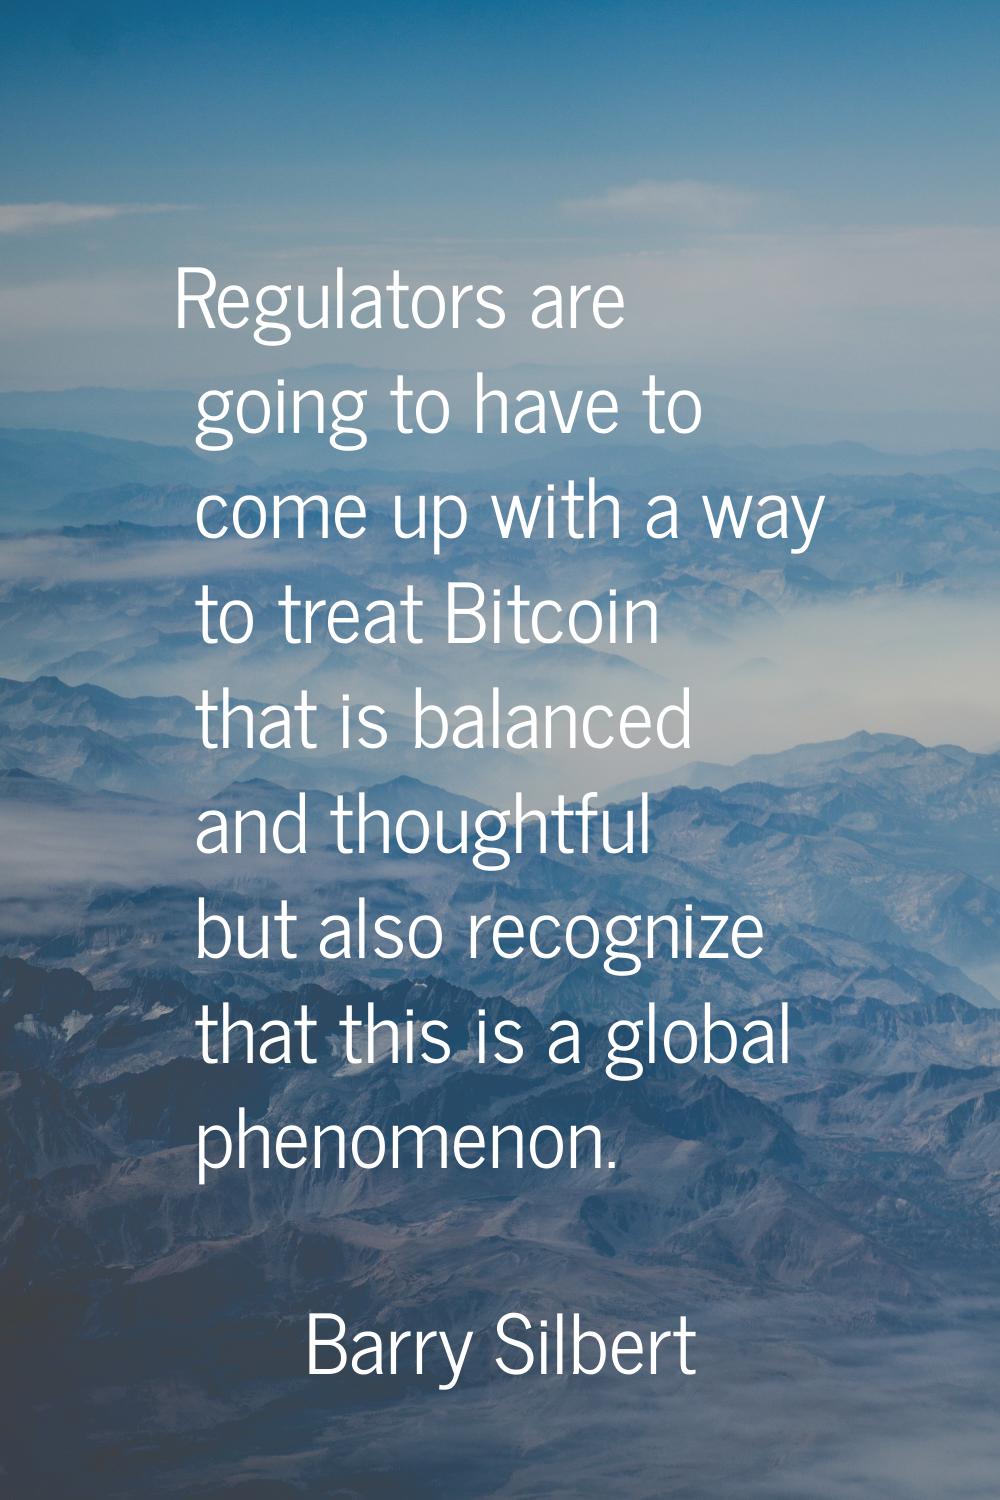 Regulators are going to have to come up with a way to treat Bitcoin that is balanced and thoughtful